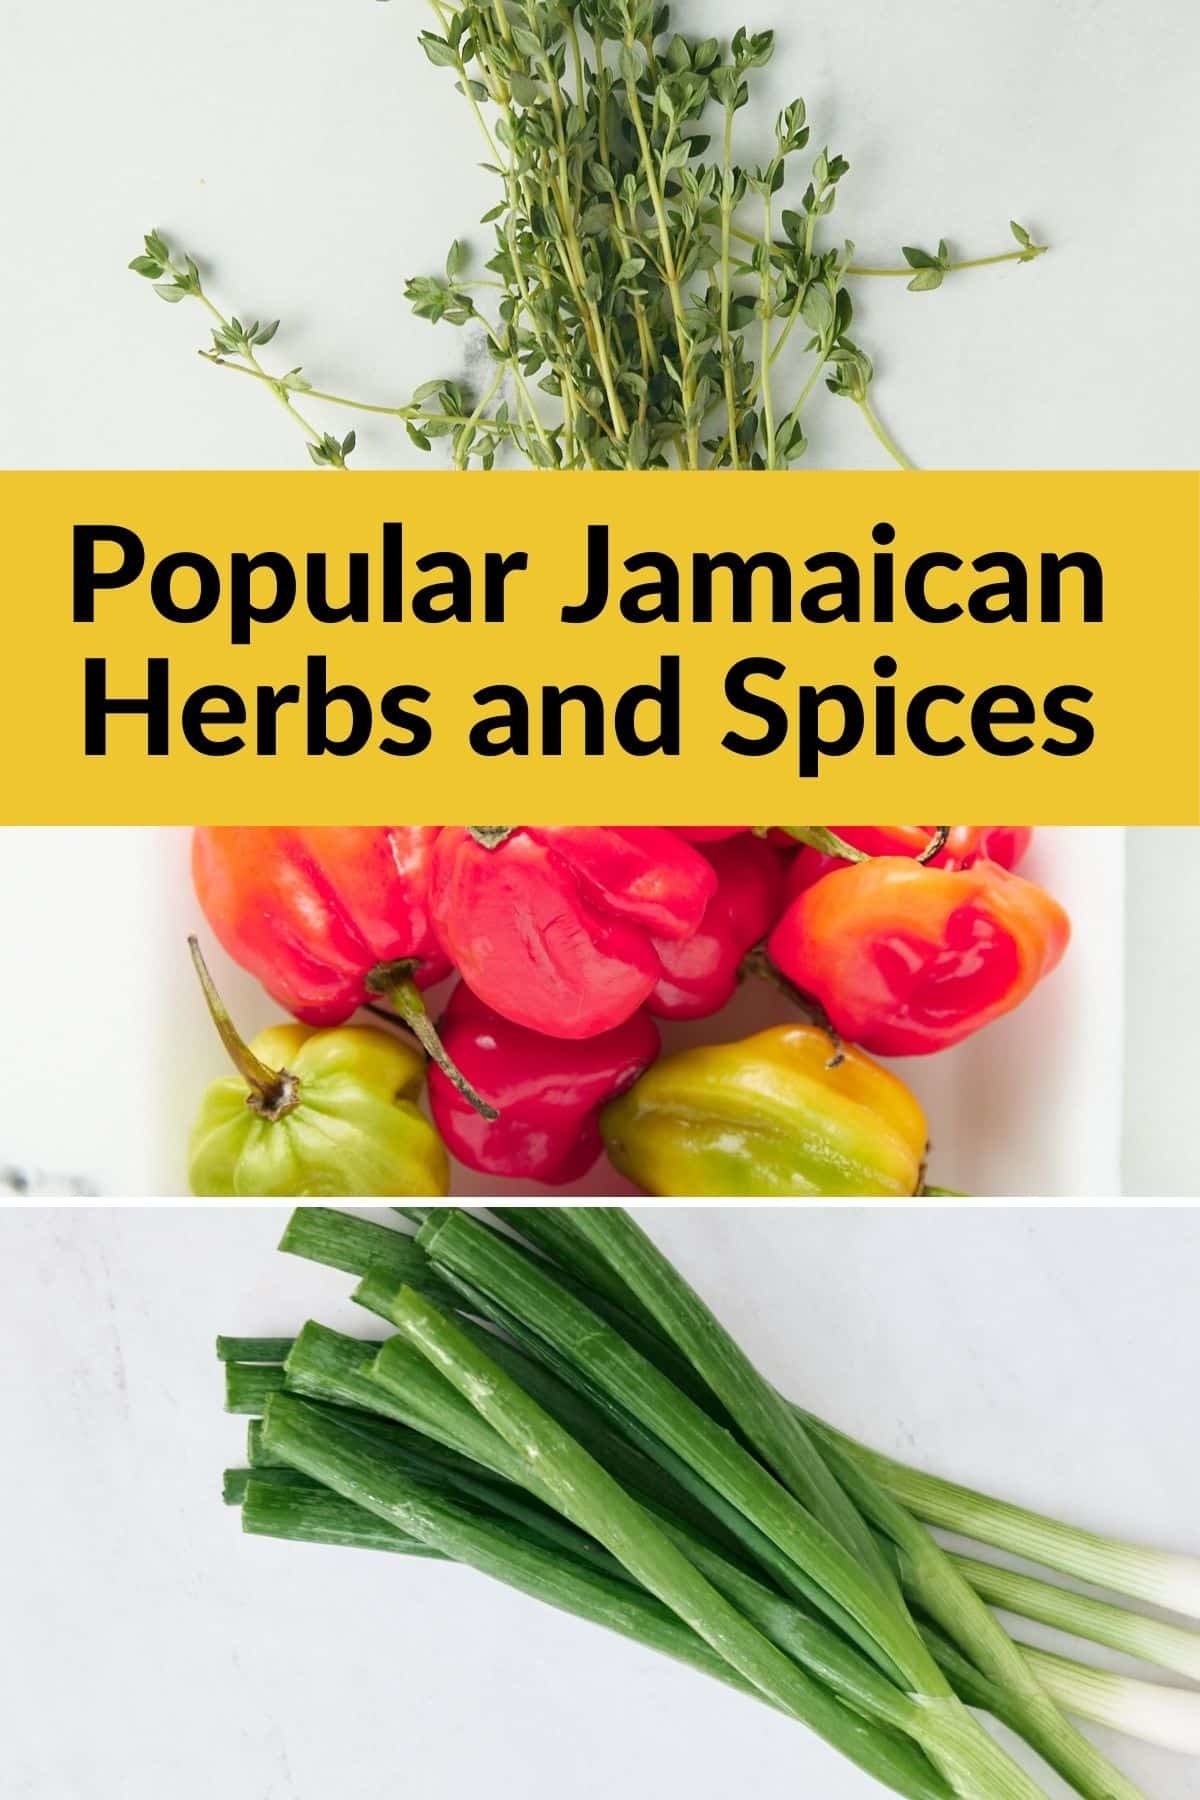 collage of scotch bonnet pepper, thyme, and green onion with text that says popular Jamaican herbs and spices